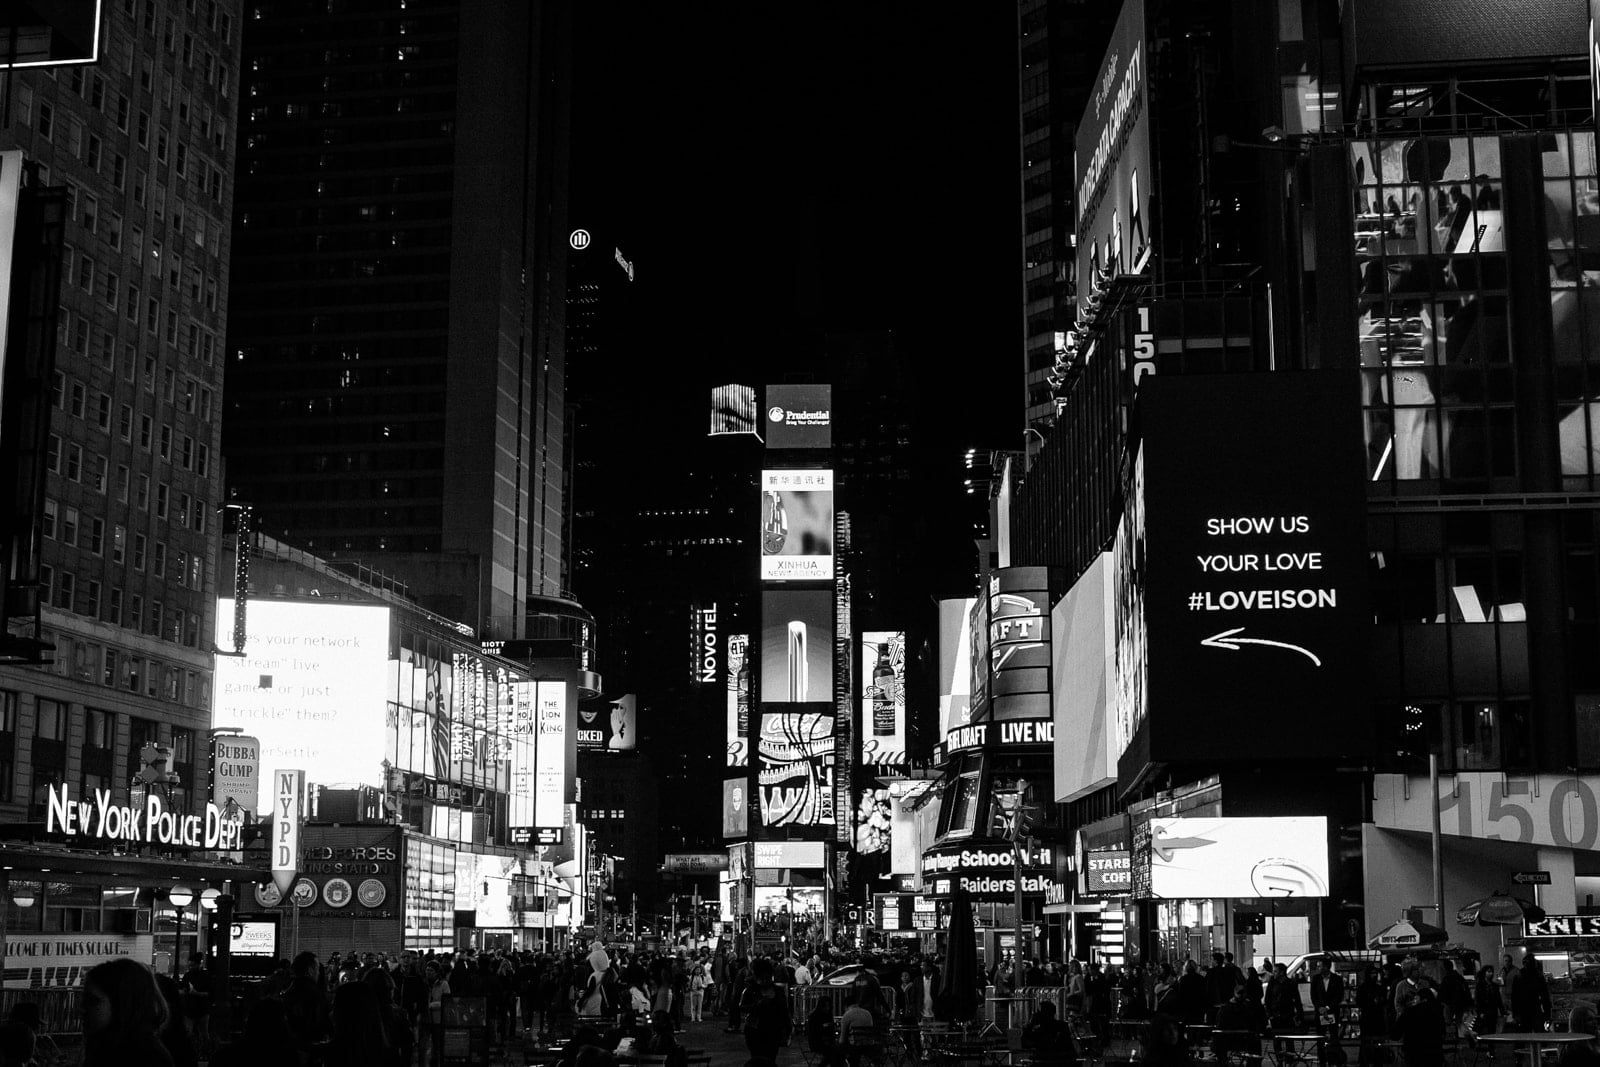 Times Square at night in NYC